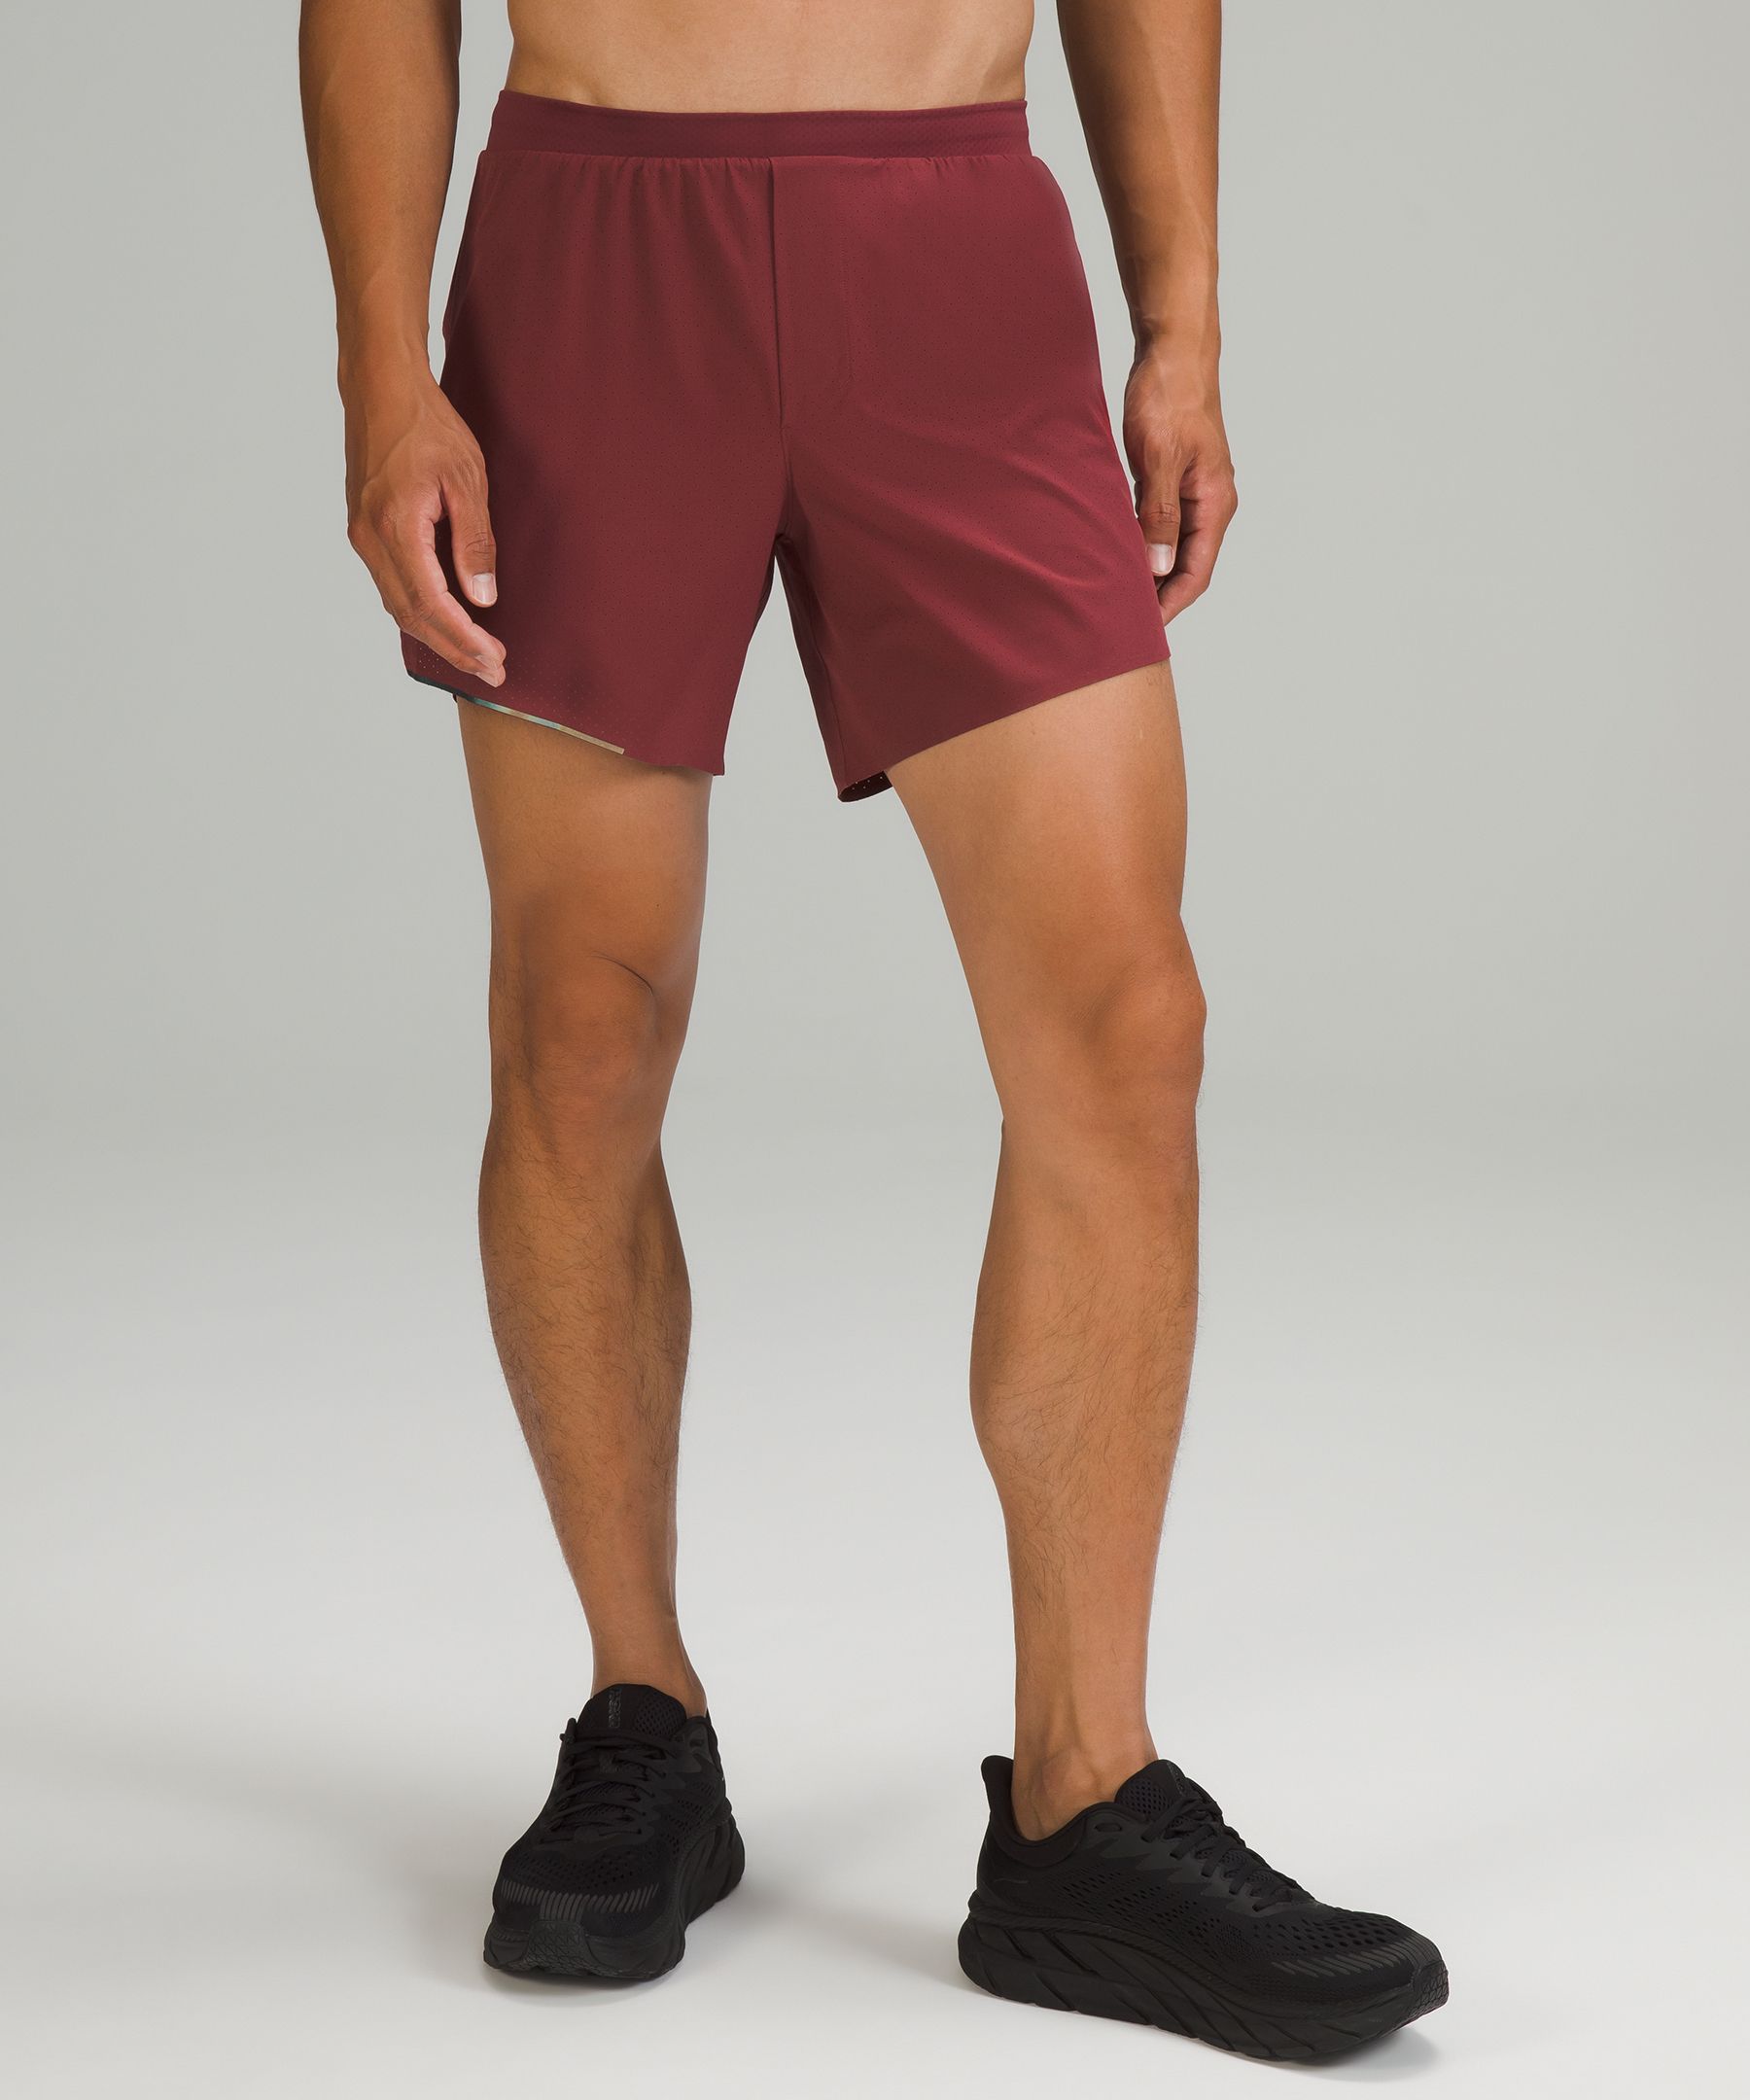 Lululemon Fast And Free Lined Shorts 6" In Mulled Wine